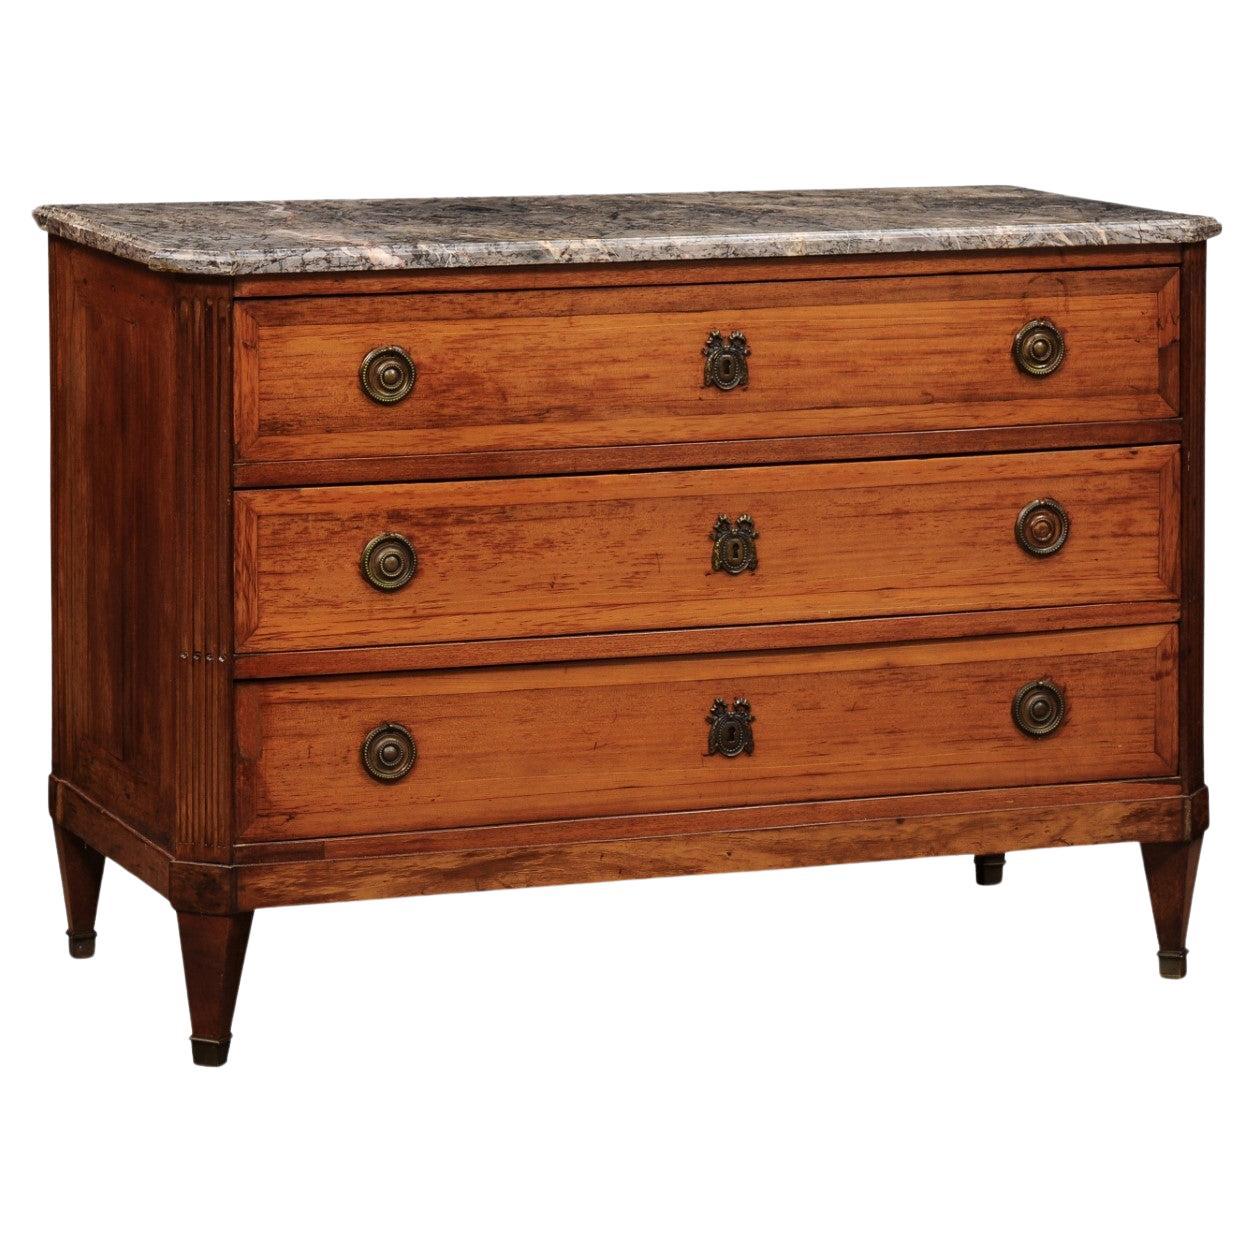 French Louis XVI Walnut Commode with Marble Top & 3 Drawers, ca. 1790 For Sale